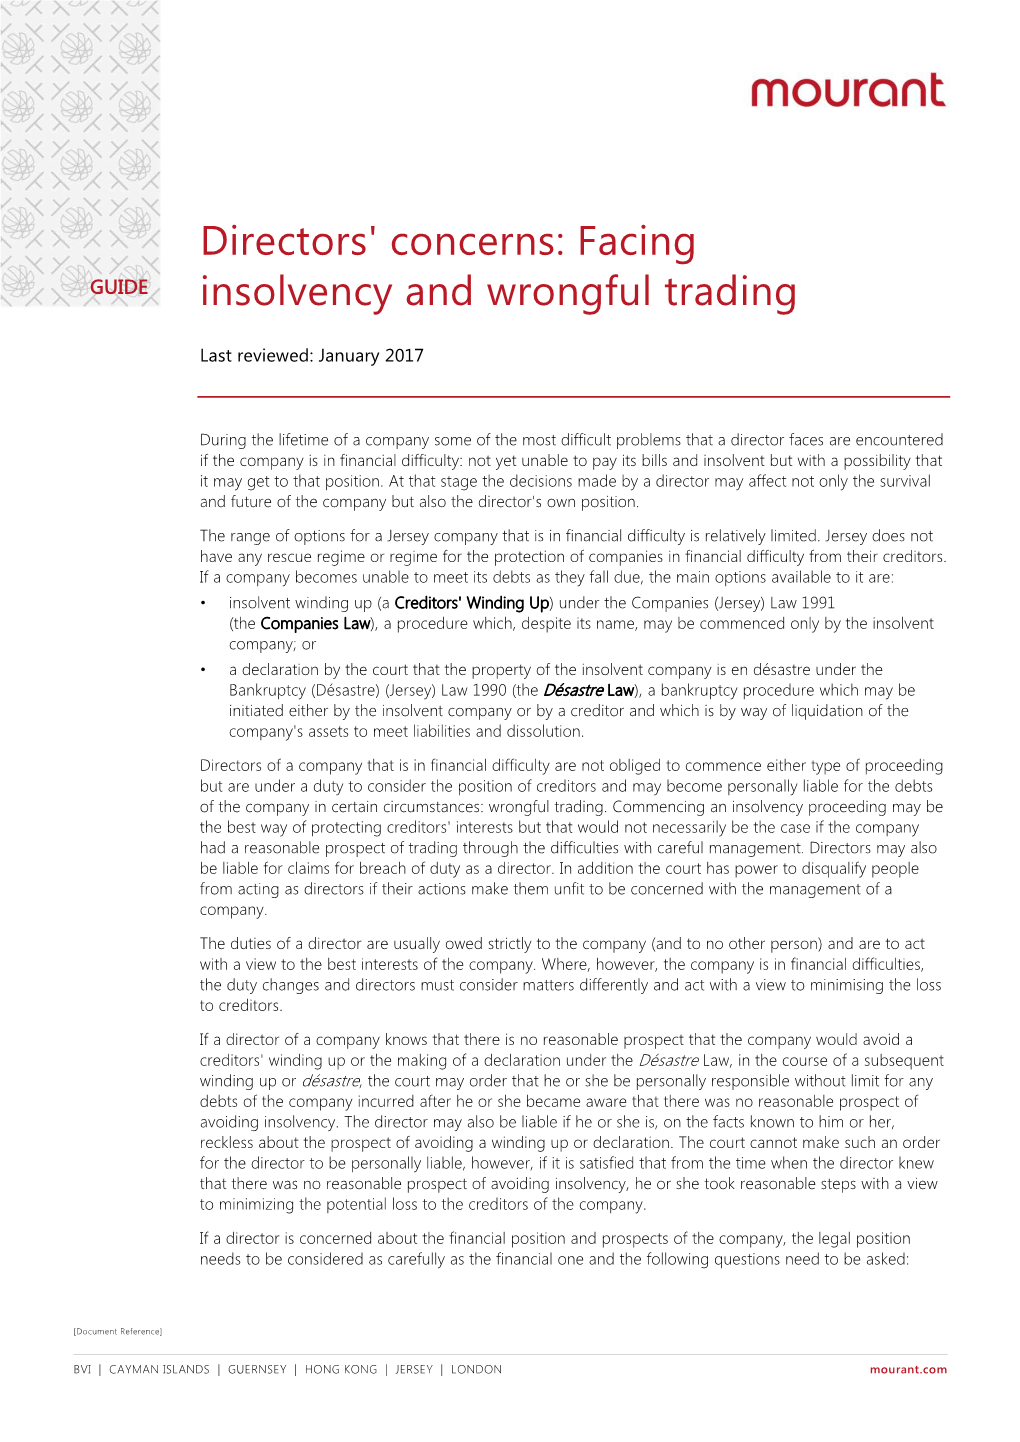 Directors' Concerns: Facing GUIDE Insolvency and Wrongful Trading